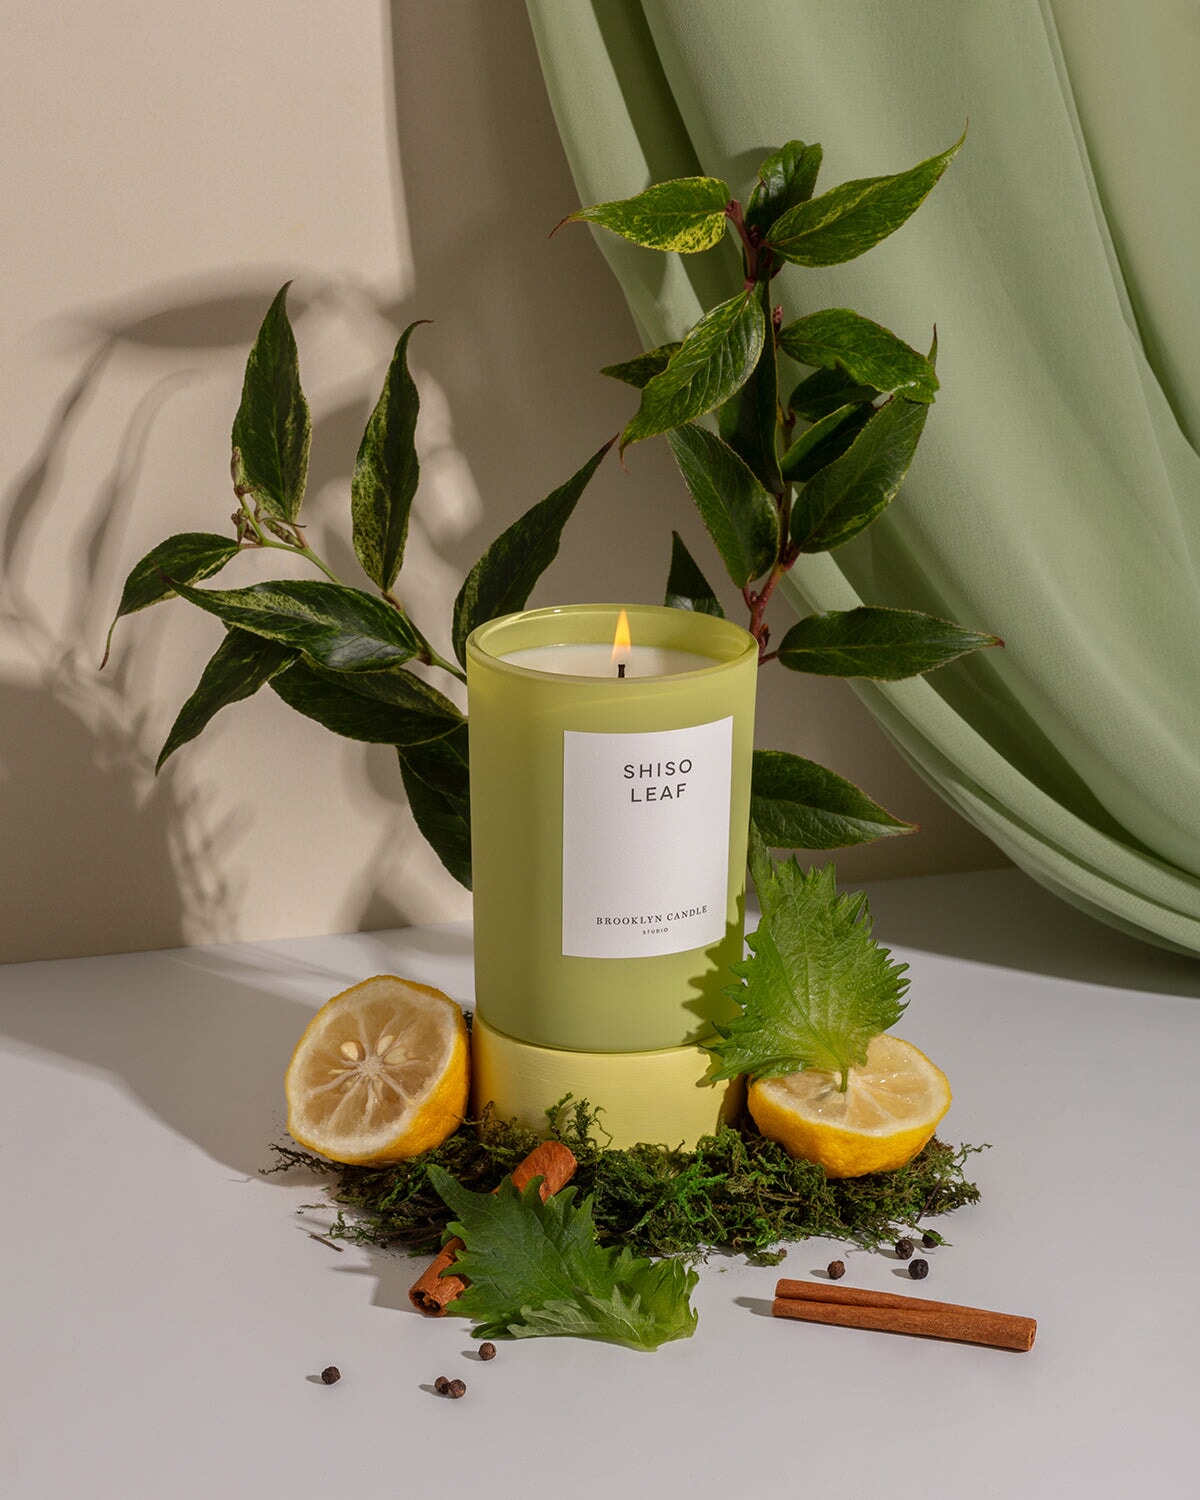 Shiso Leaf Limited Edition Candle Herbarium Collection Brooklyn Candle Studio 